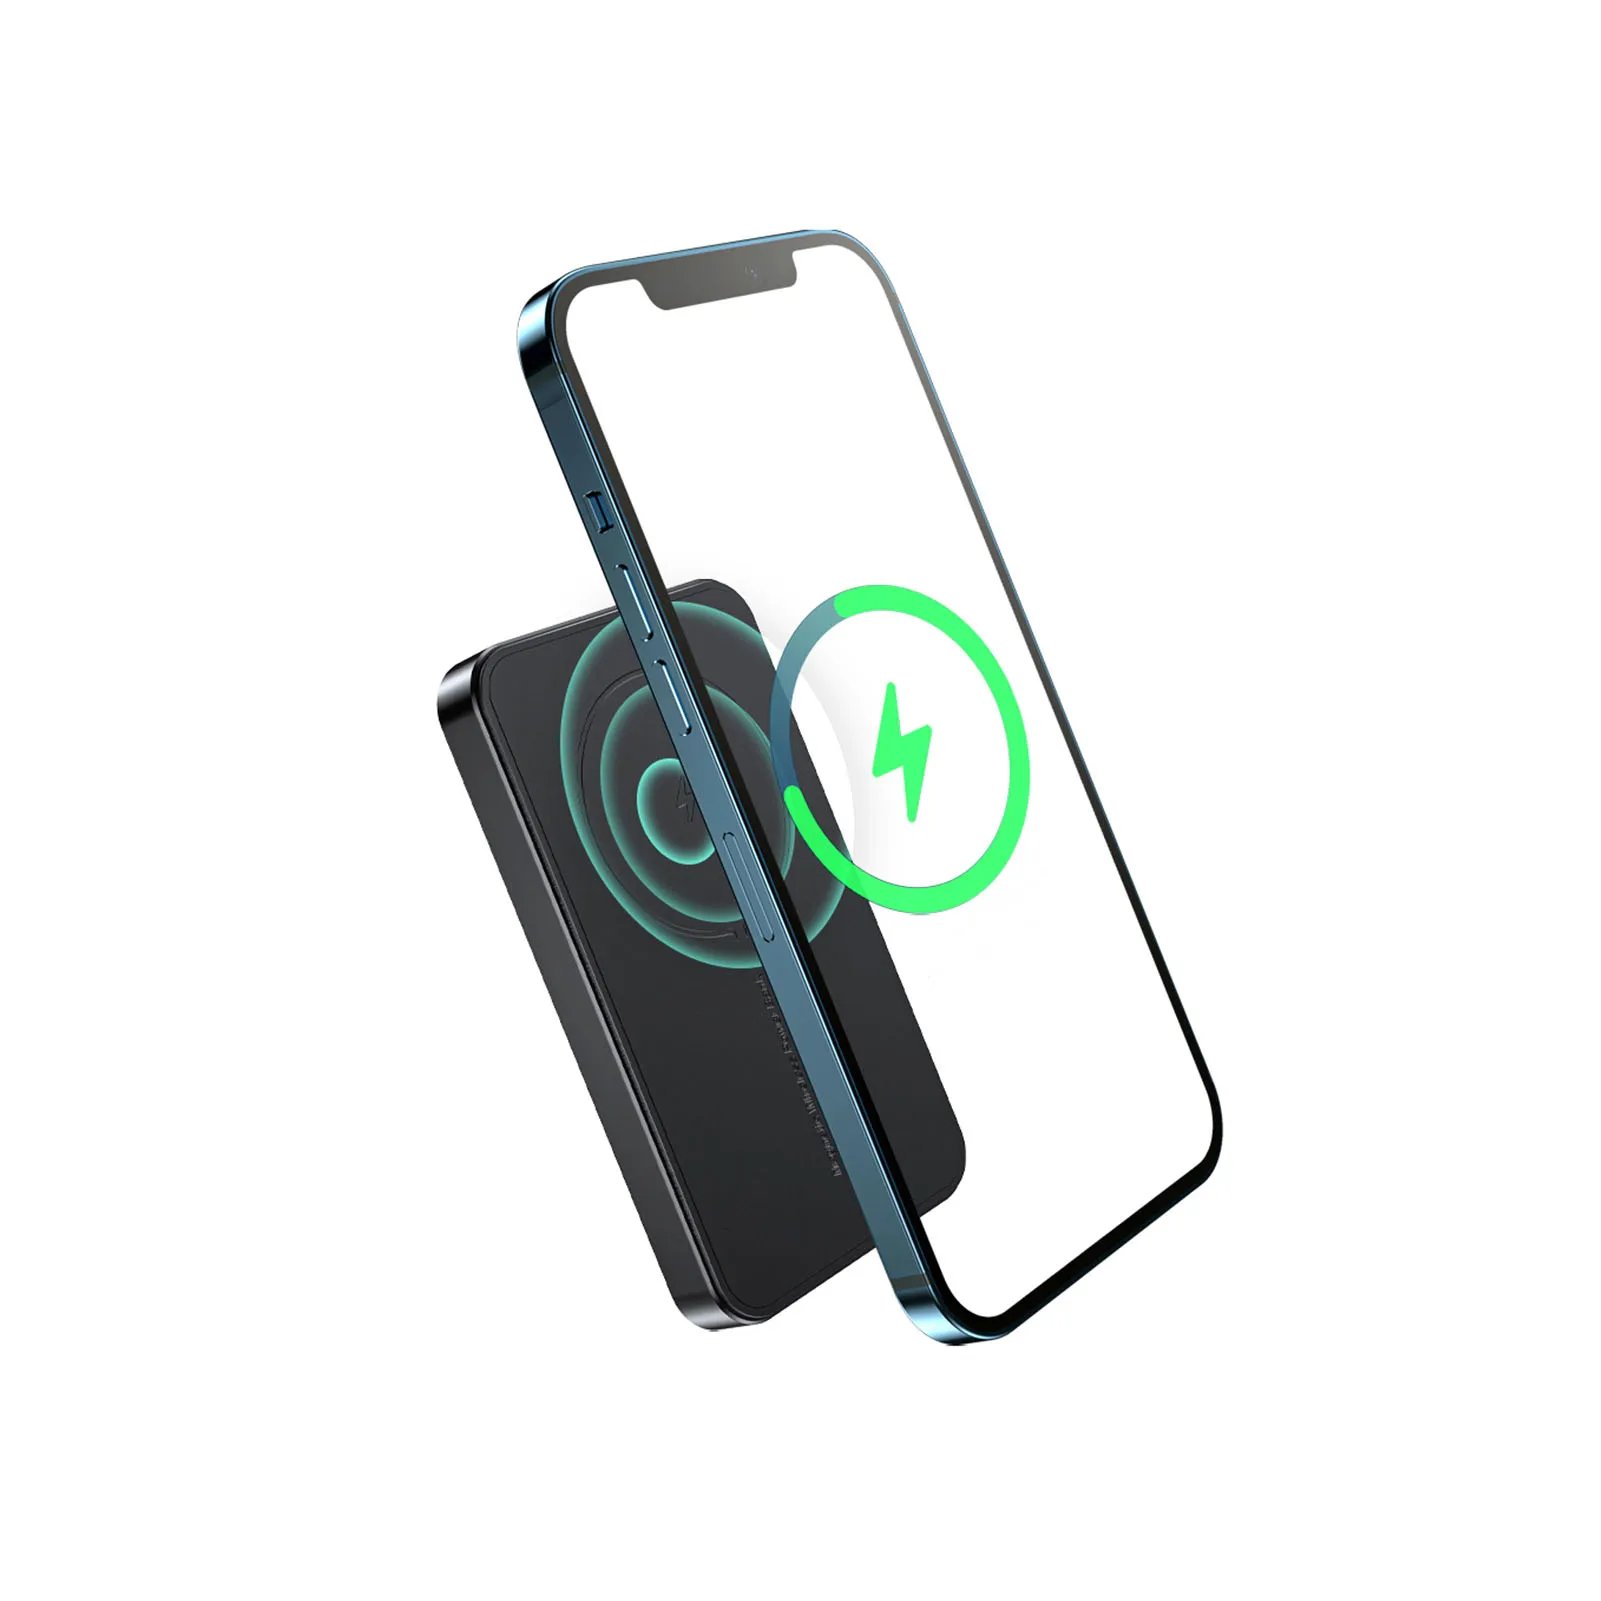 

Fast Power Bank Portable Wireless Charger With Universal Compatibility 19.25W Qi-Certified Fast Wireless Charging Pad